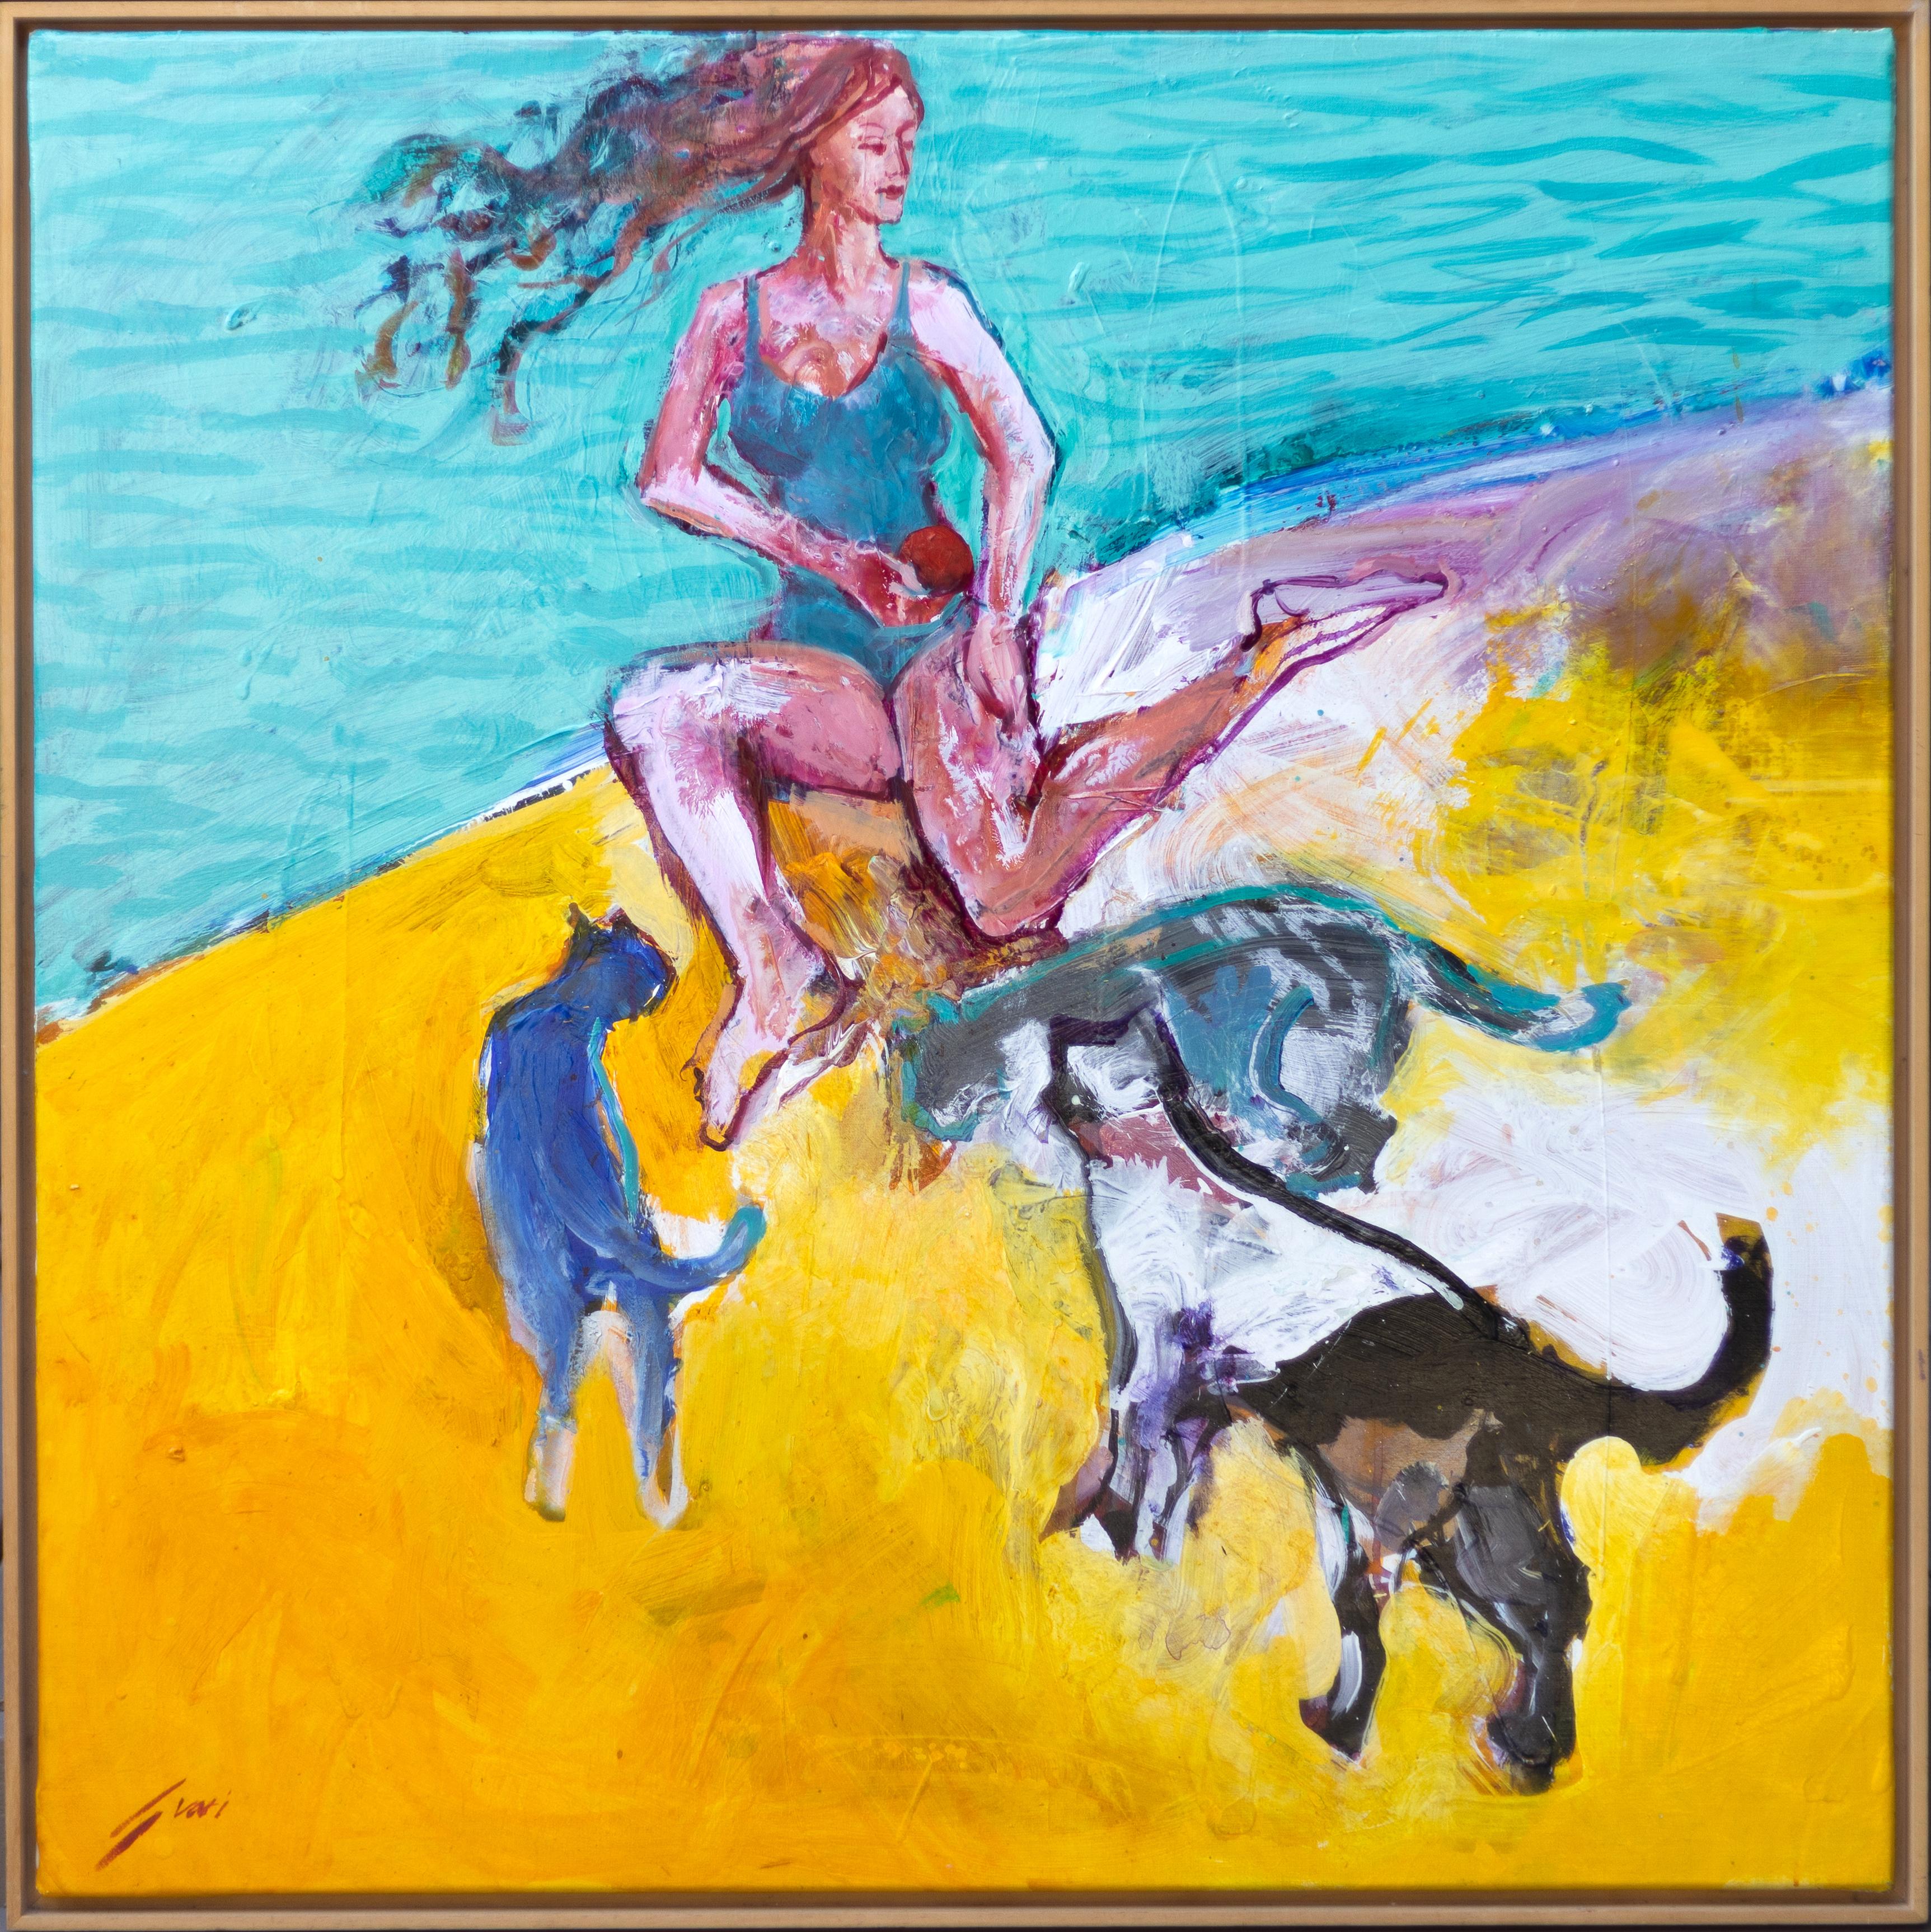 Cats and a Woman - Expressionist Painting by Pep Suari